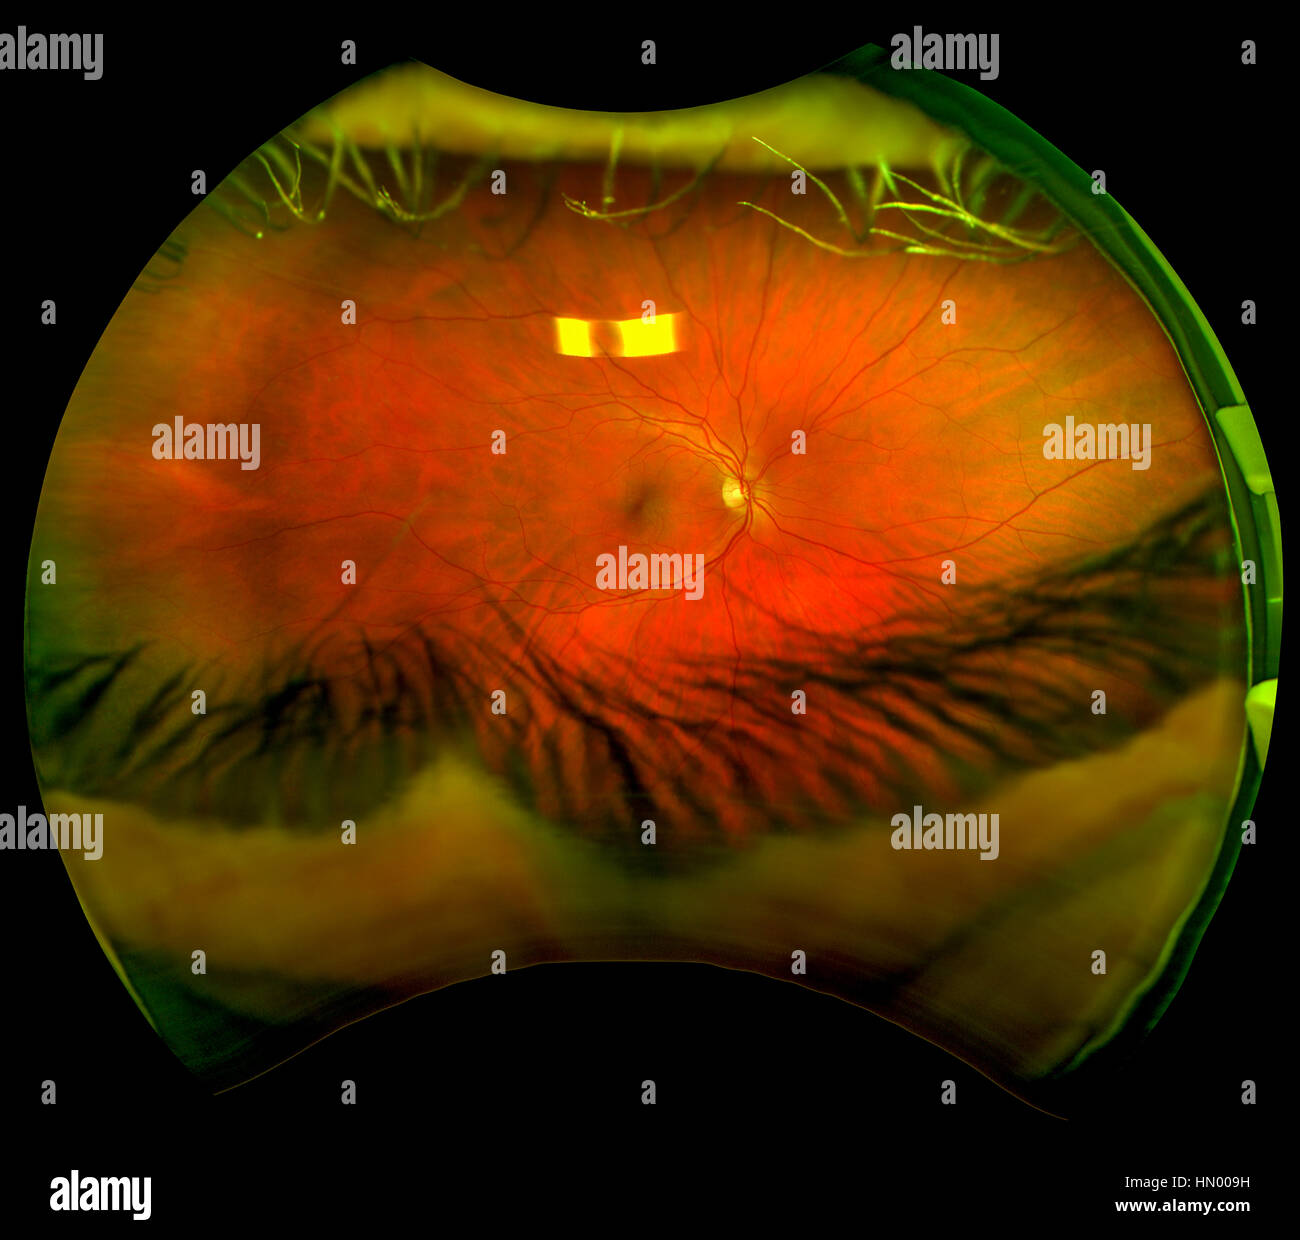 An ultra wide digital retinal scan of a human eye showing the veins and capillaries in a retina. Stock Photo